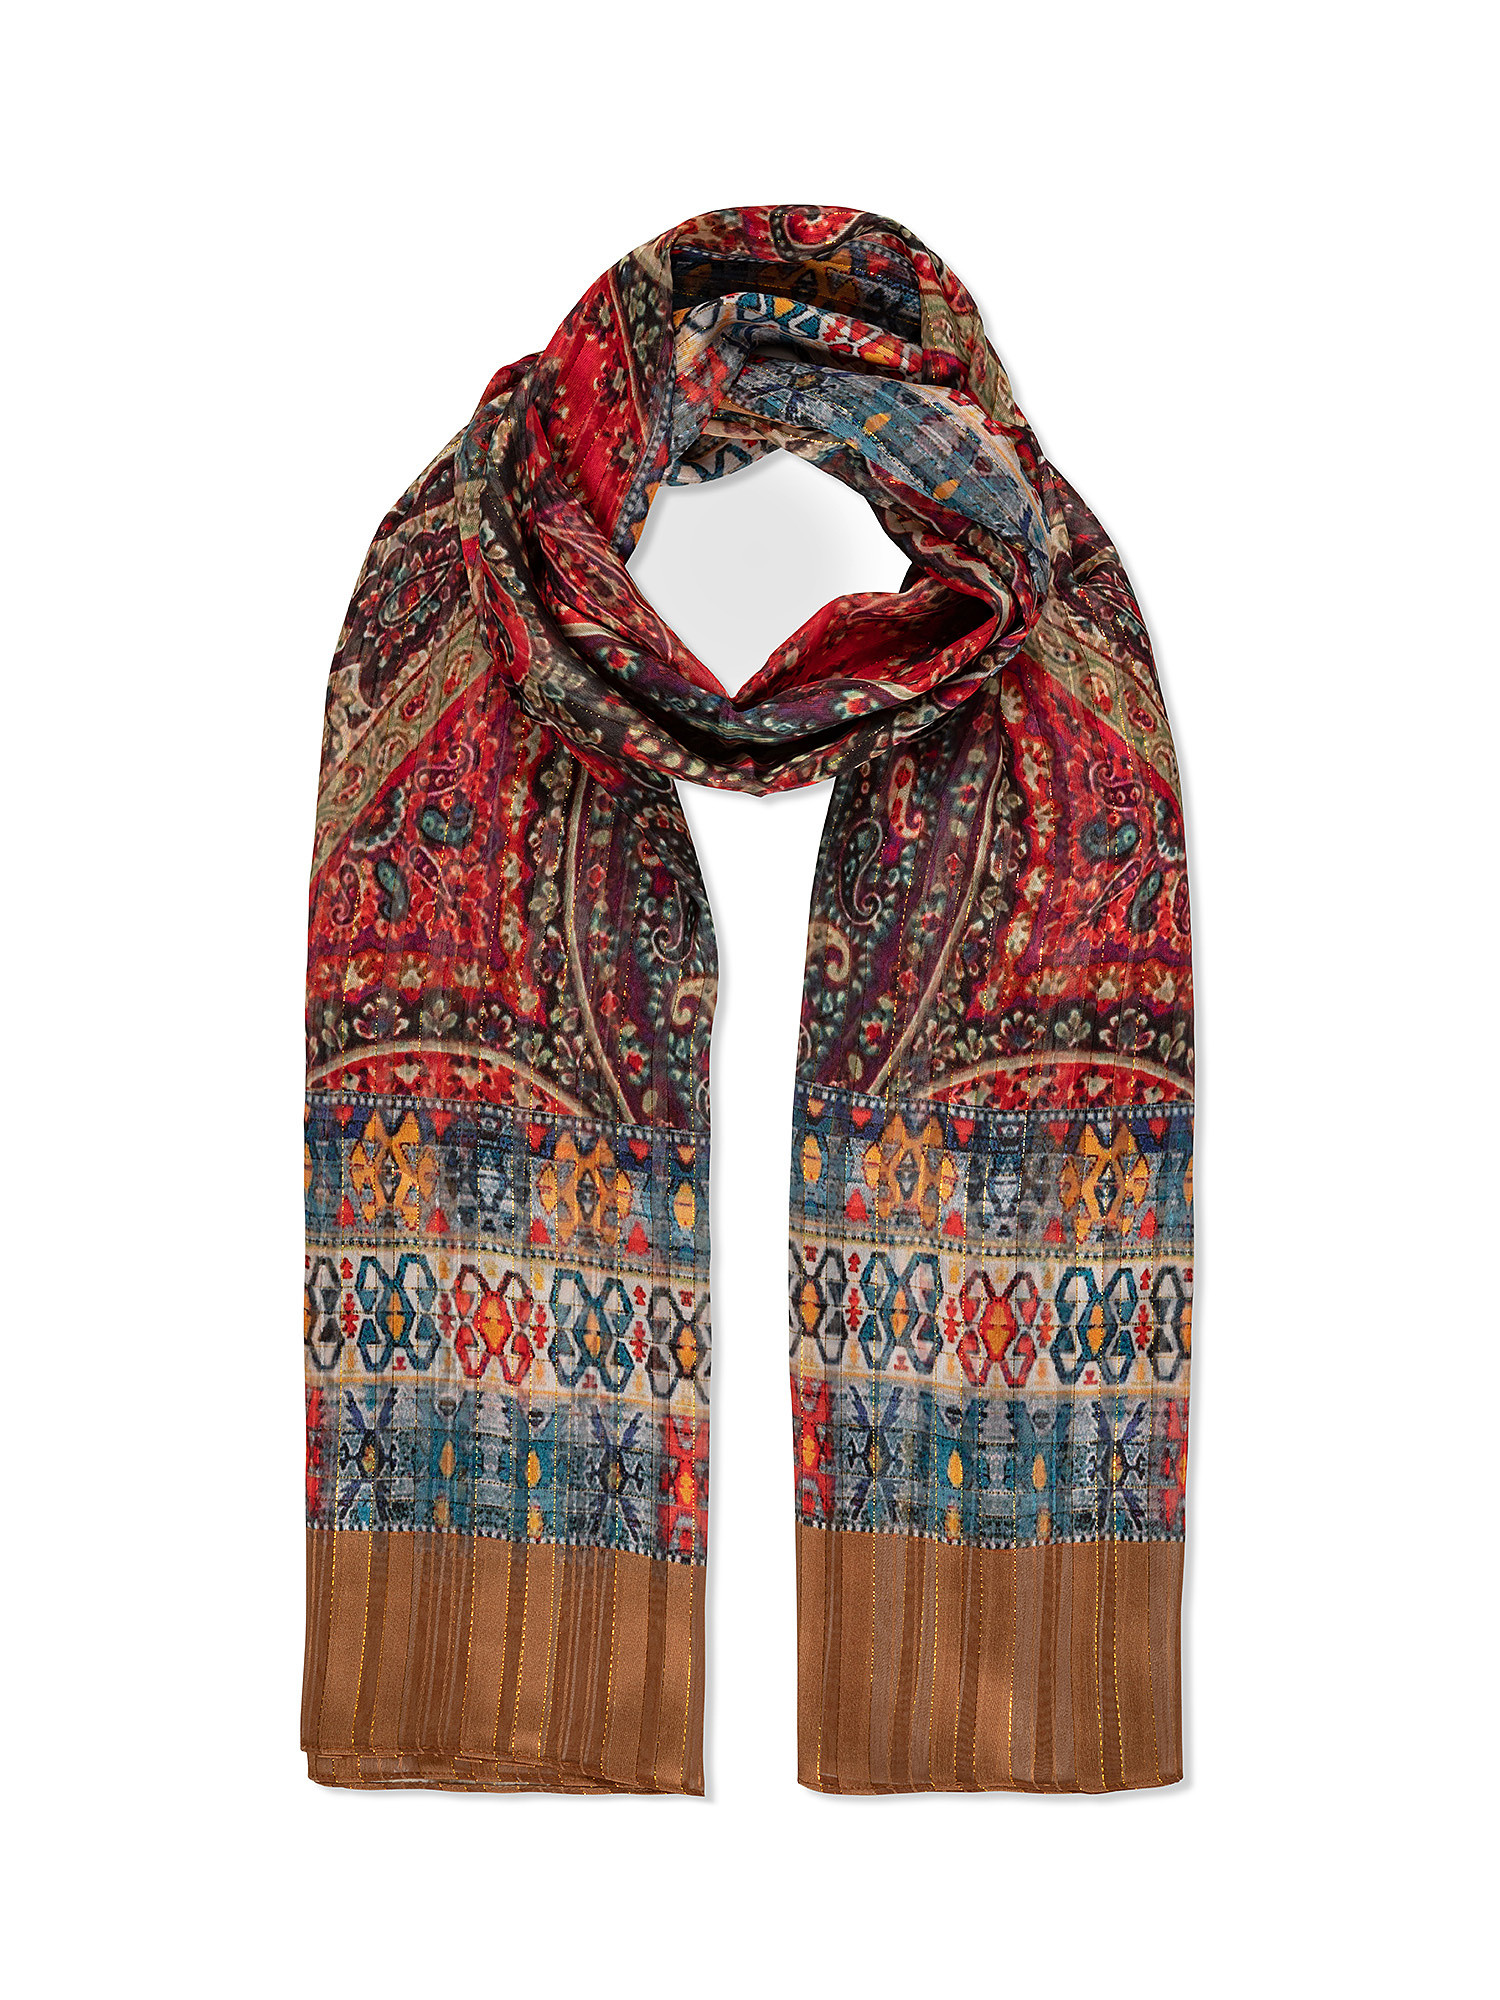 Koan - Scarf with design, Multicolor, large image number 0